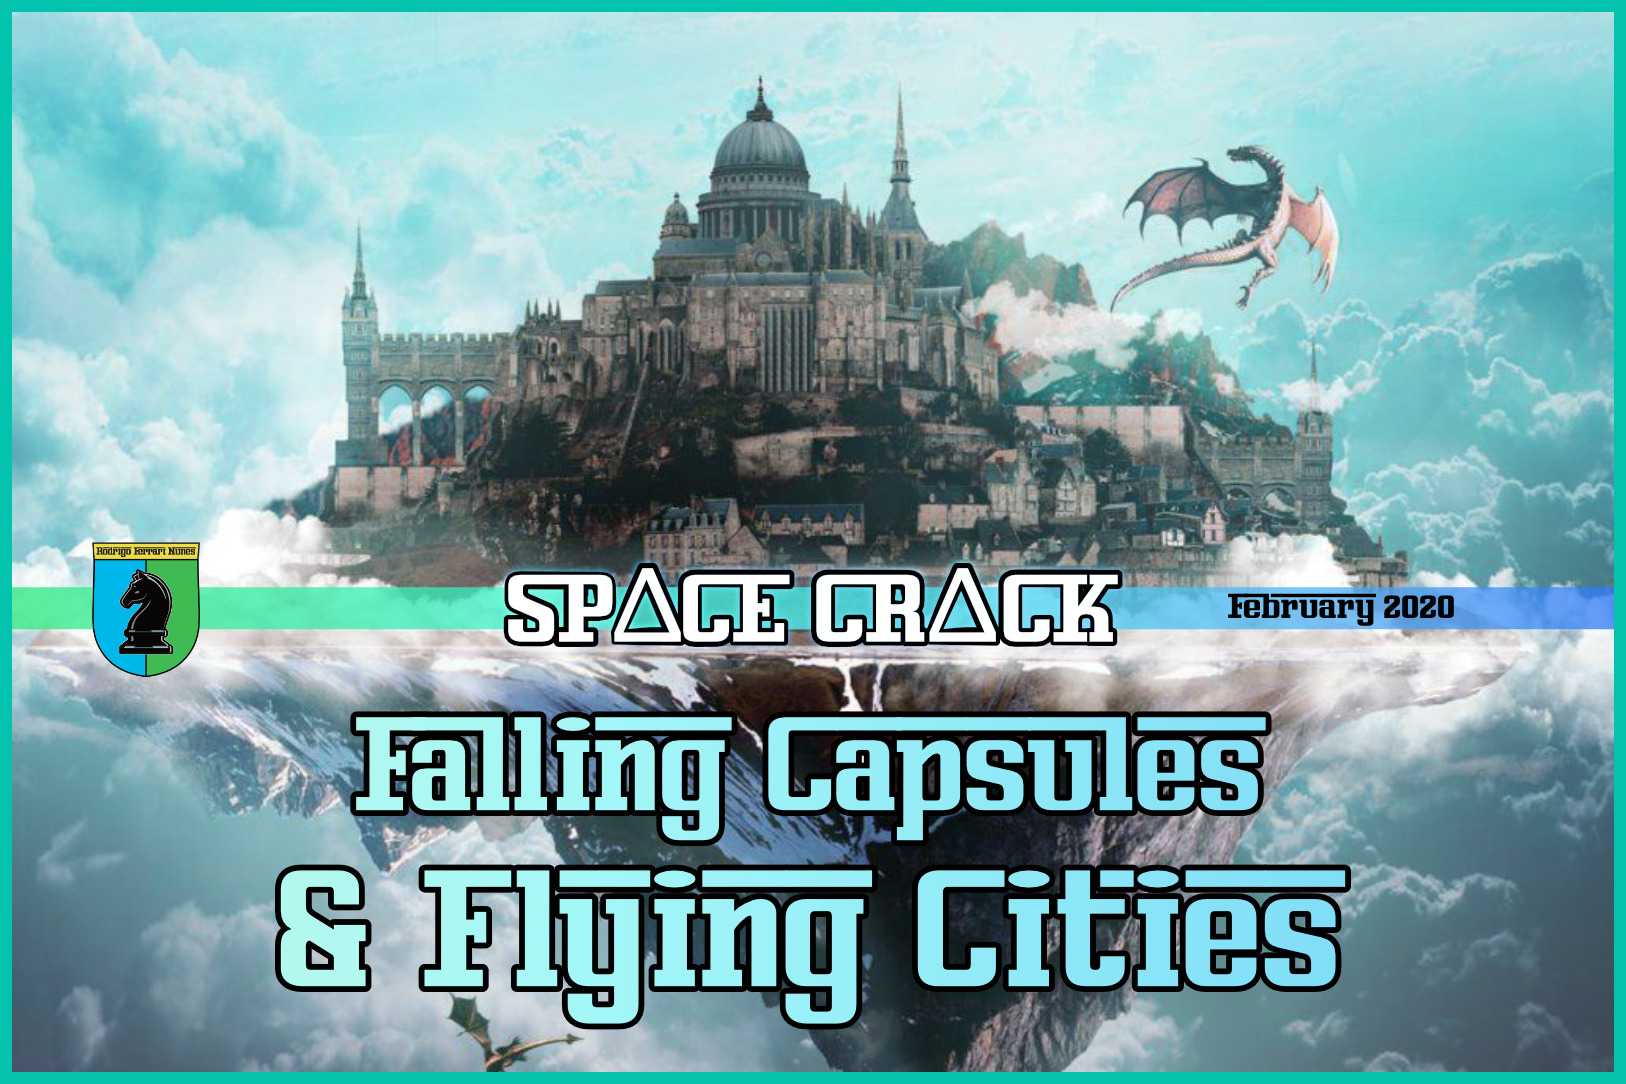 FALLING CAPSULES & FLYING CITIES